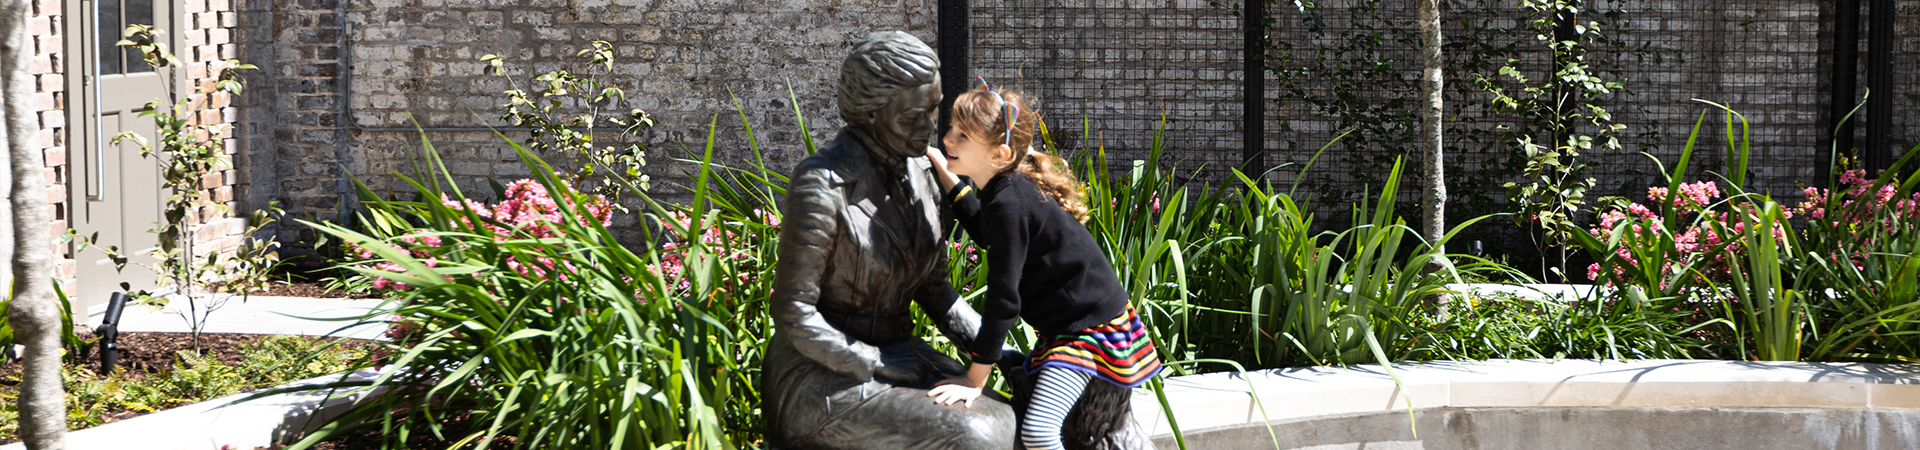  a young girl leaning into a statue of juliette gordon low 